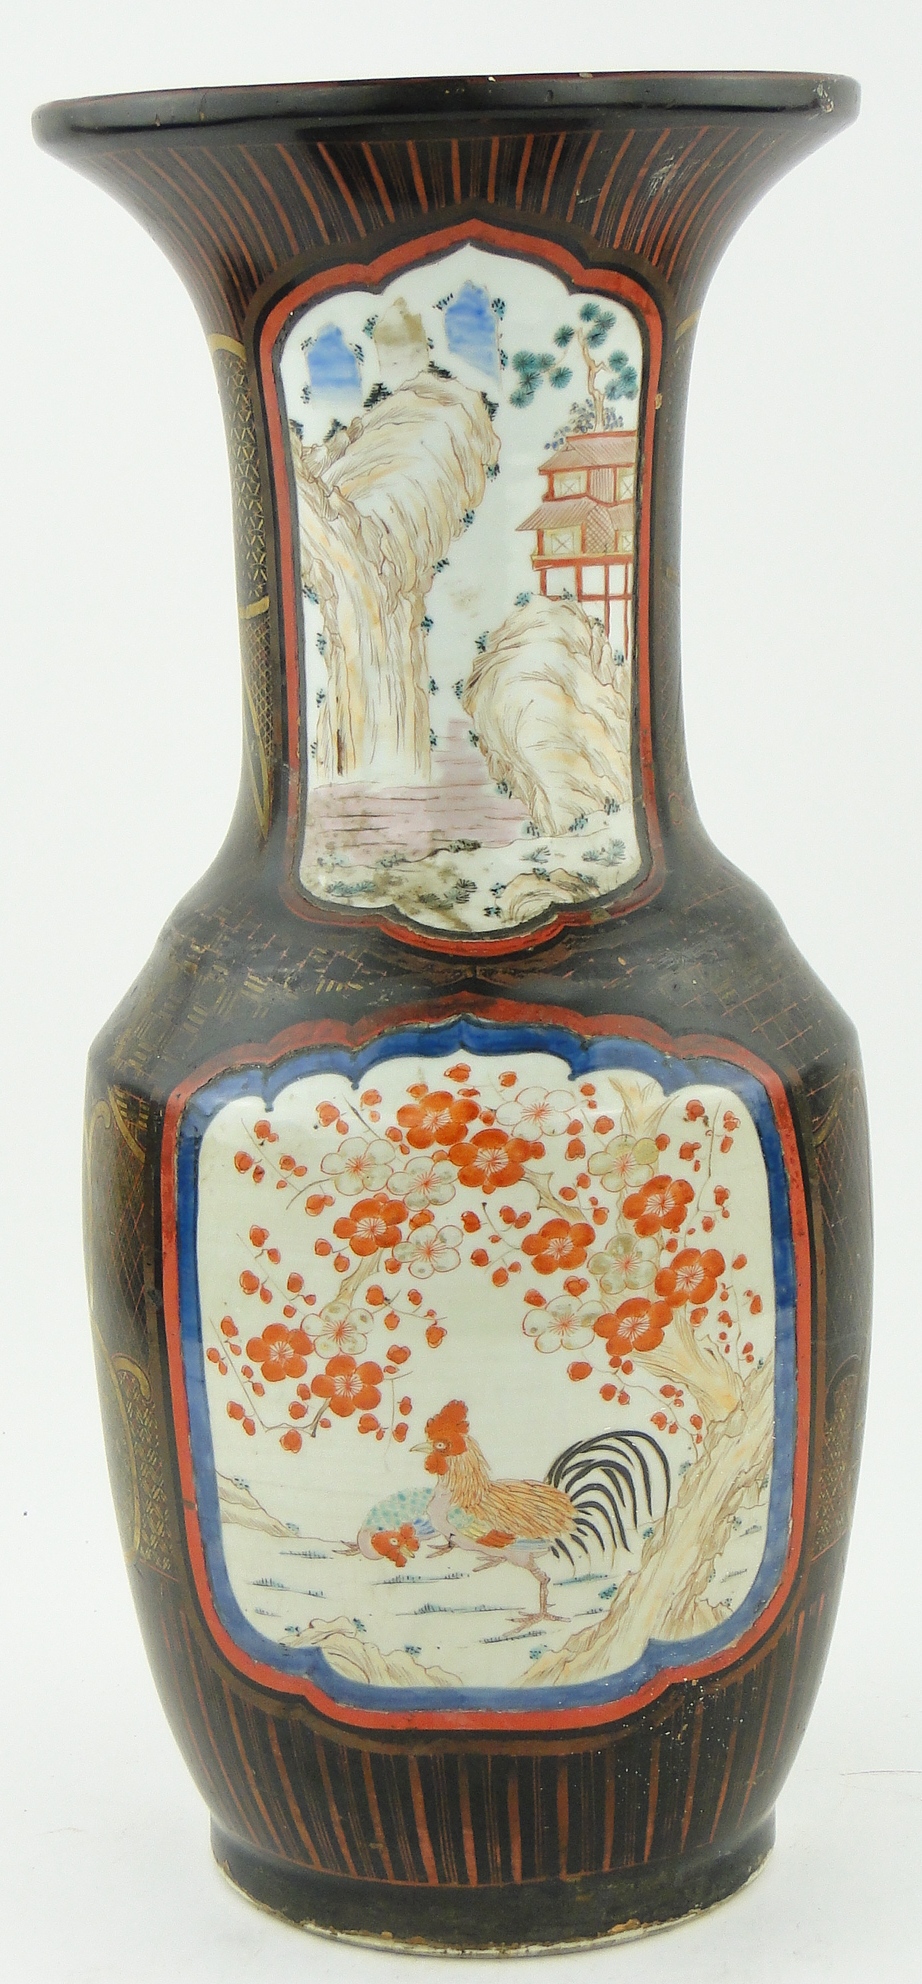 18/19th century Chinese vase
with lacquer and hatch gilded ground covering blue and white - Image 3 of 10